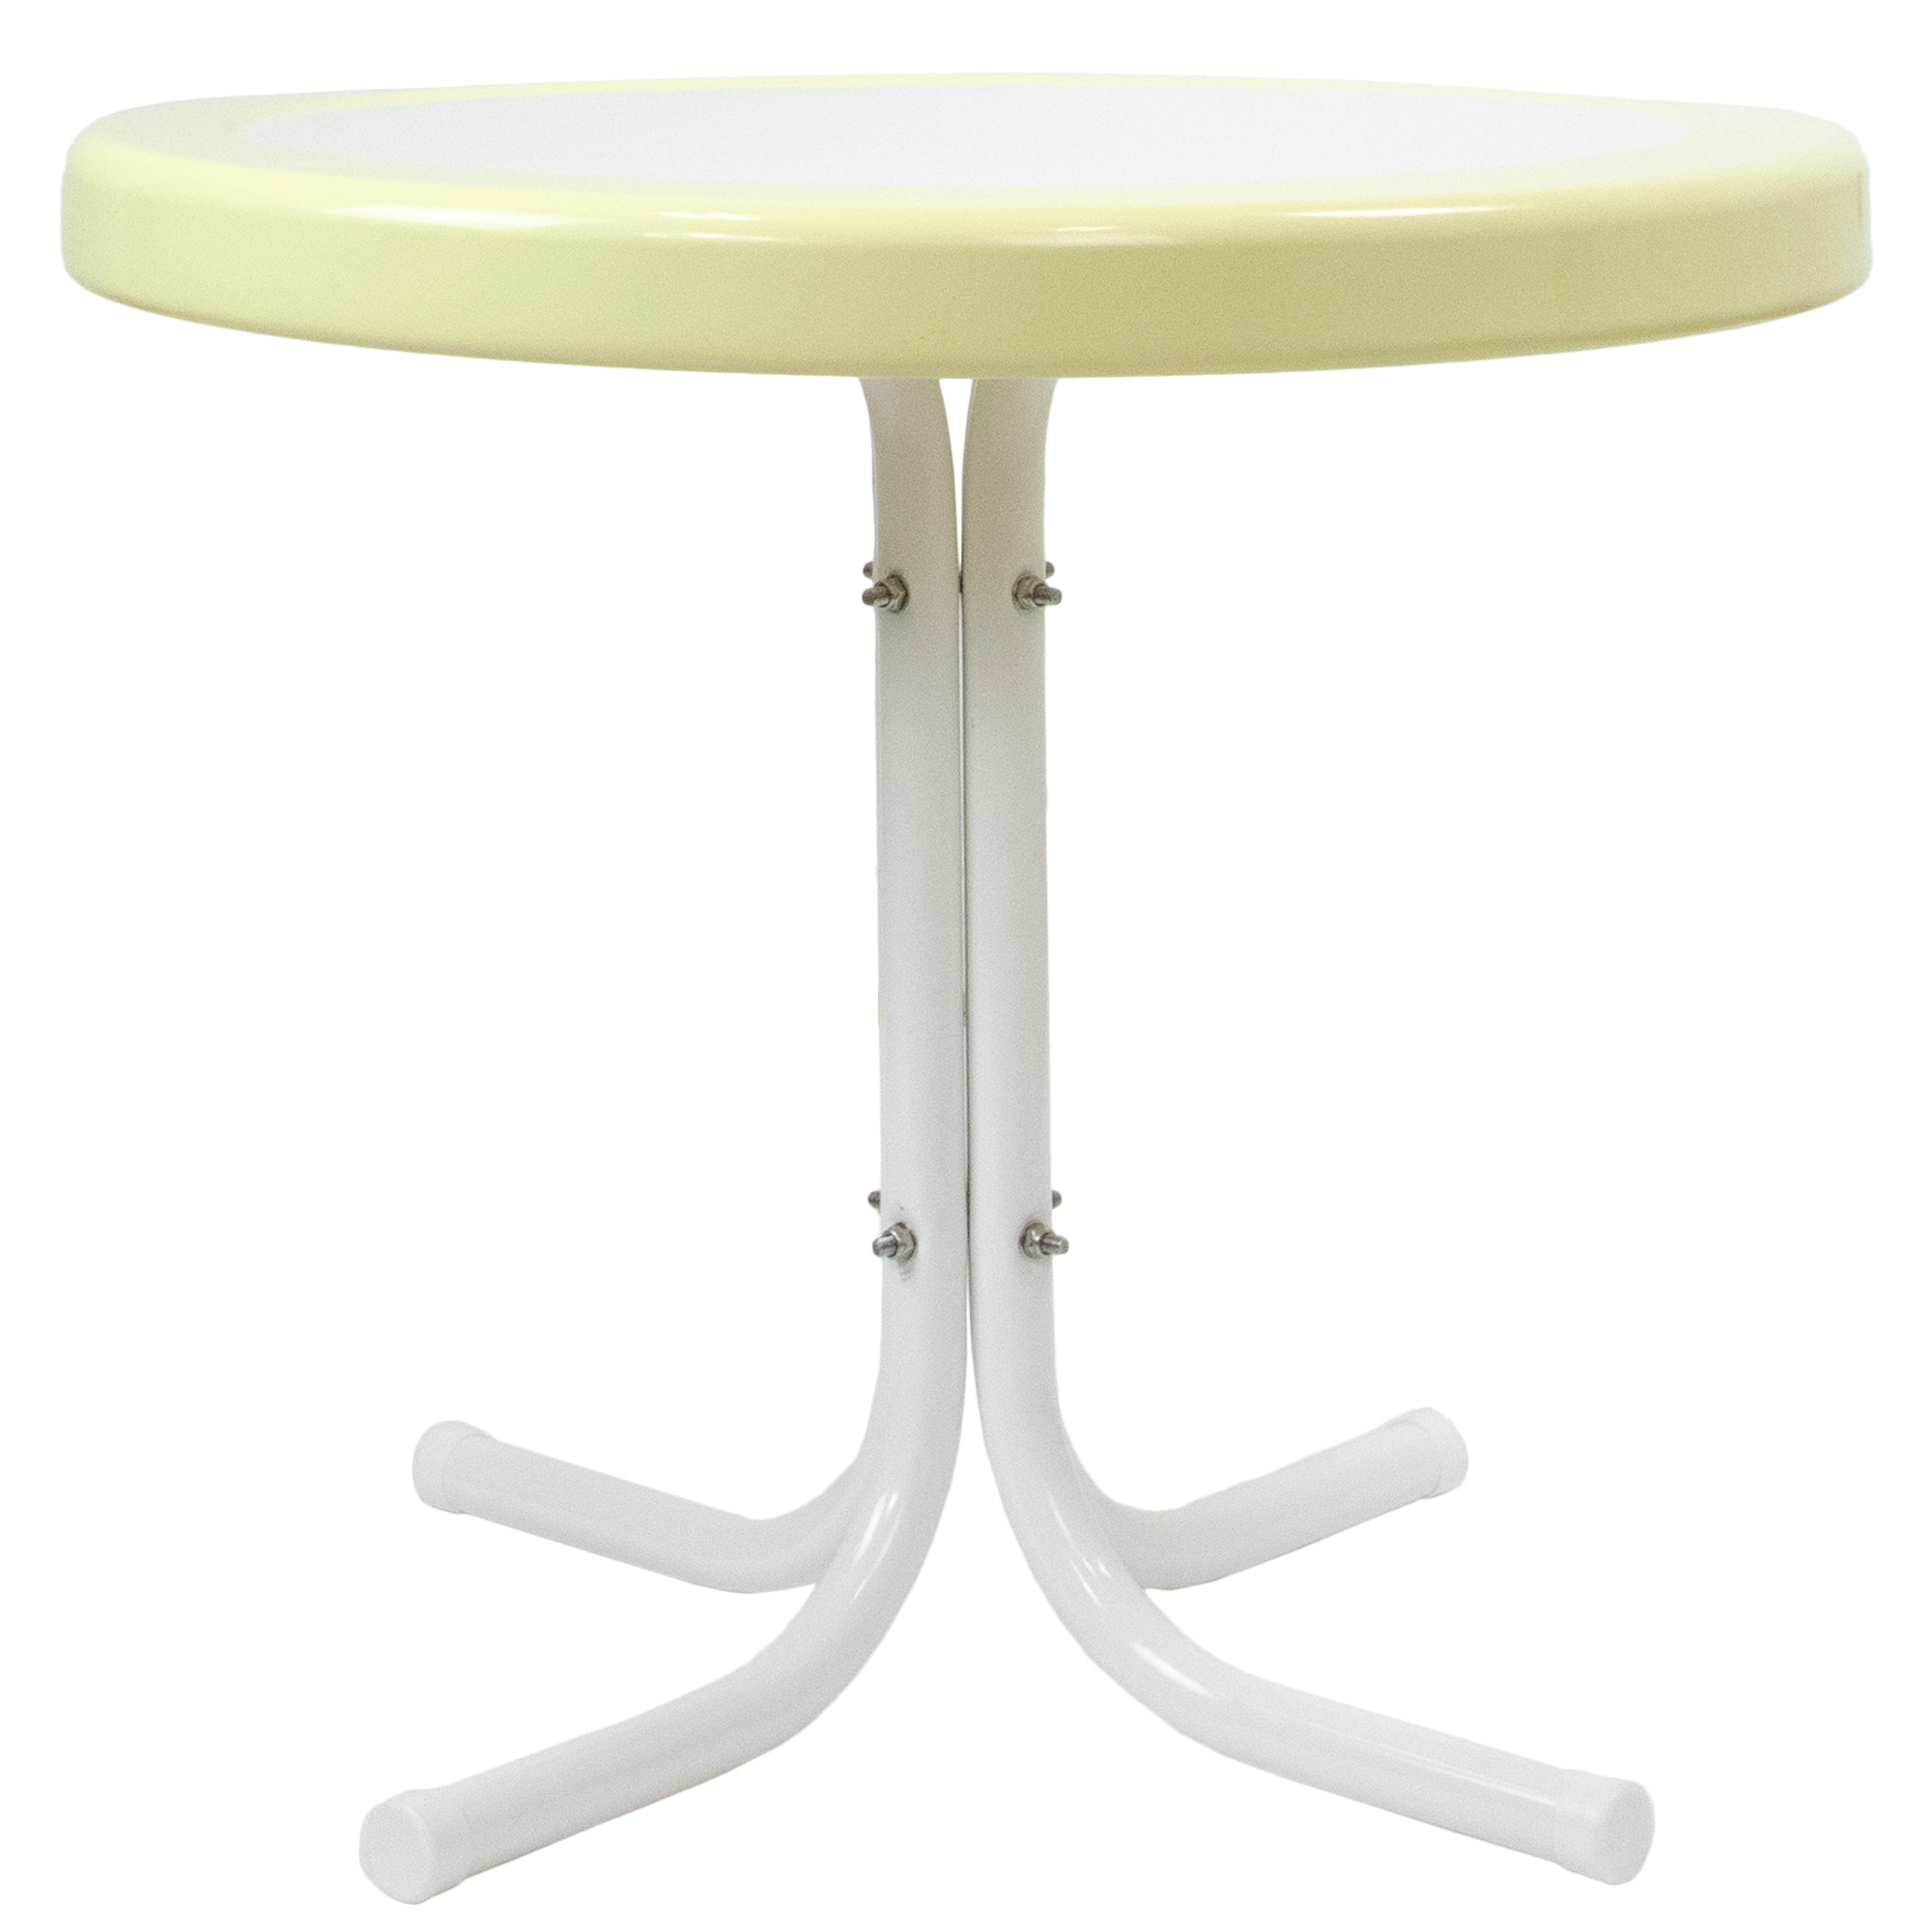 Northlight 22" Outdoor Retro Tulip Side Table, Yellow and White - image 4 of 4